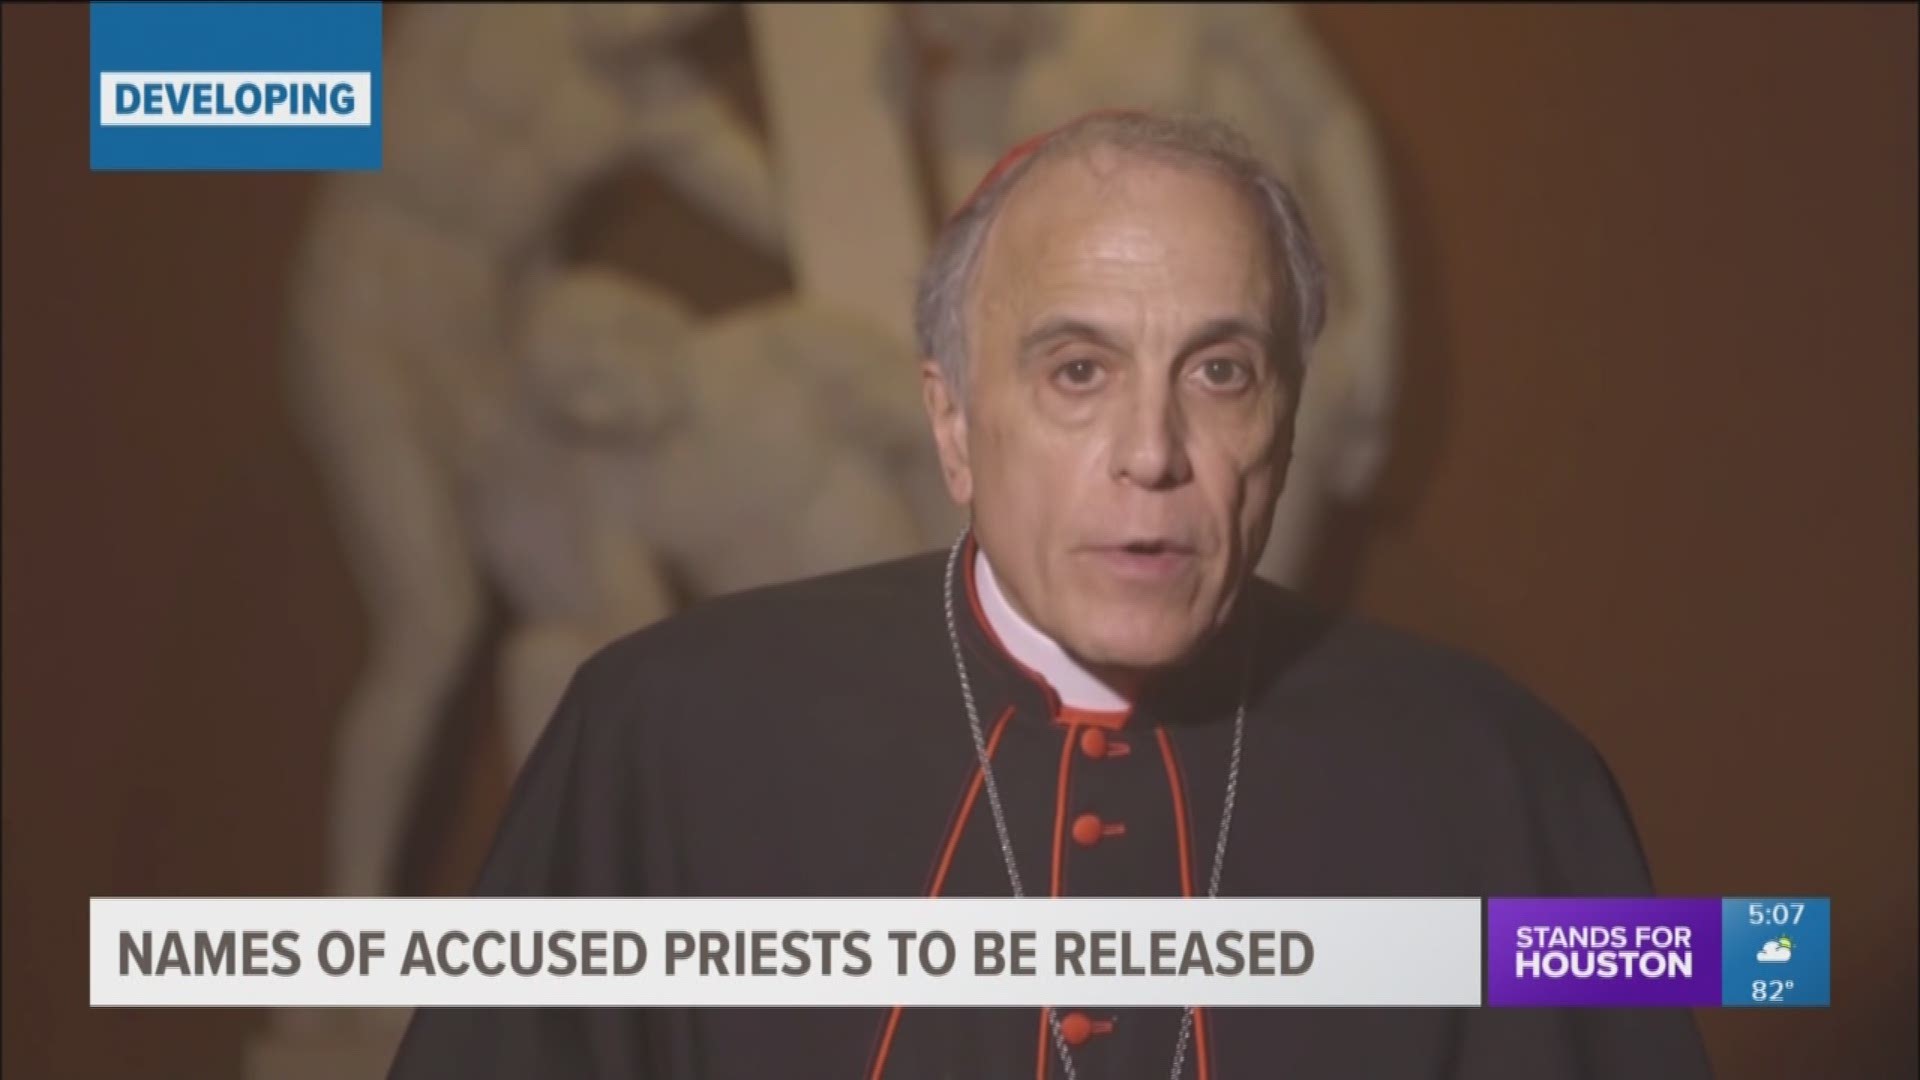 In a stunning decision, the Archdiocese of Galveston-Houston announced Wednesday it will release the names of all clergy "credibly accused" of sexually abusing a minor, dating back to at least 1950.